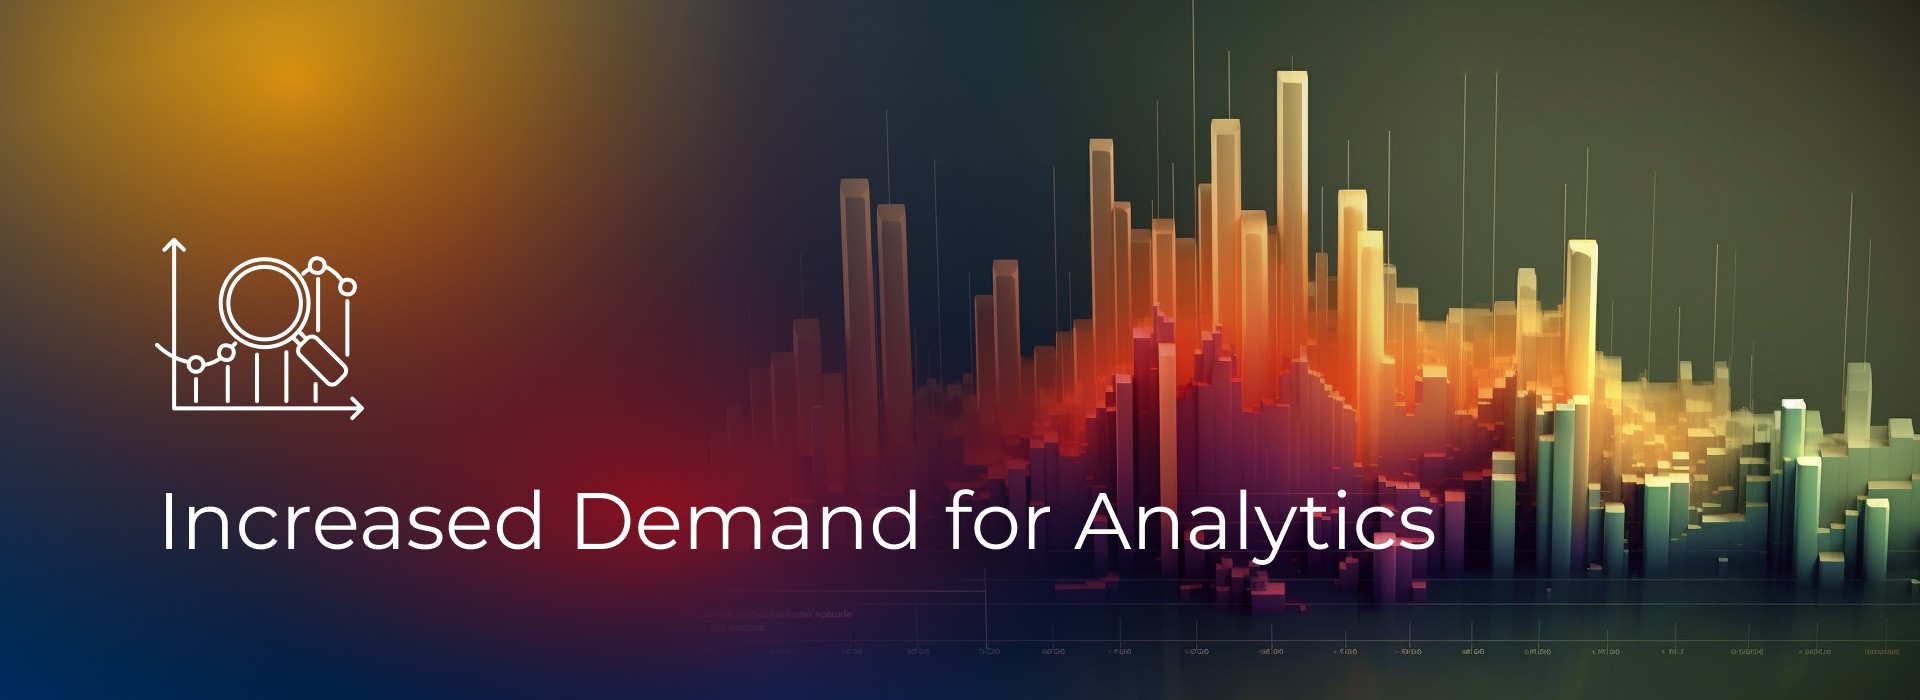 Increased Demand for Analytics